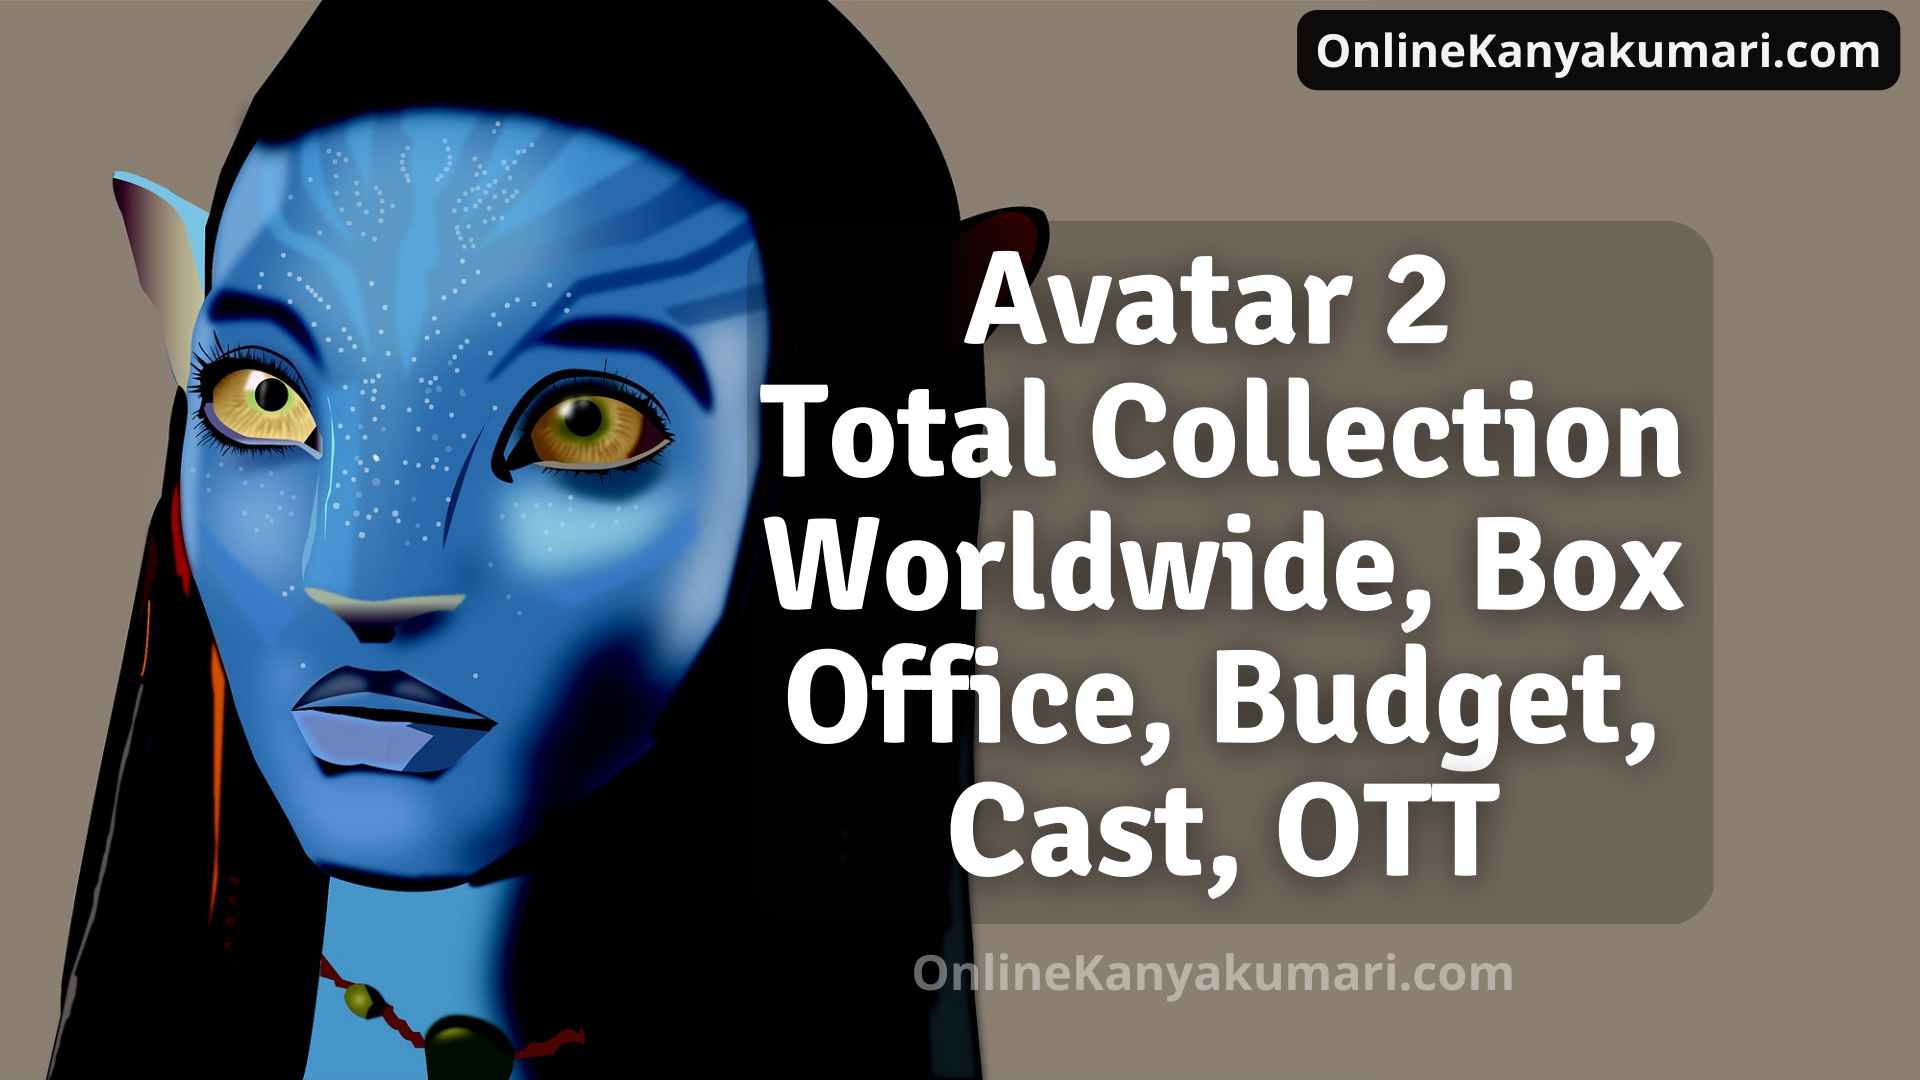 Avatar 2 collects 80 cr in just 2 days in India isnt as impressive  overseas  Hollywood  Hindustan Times